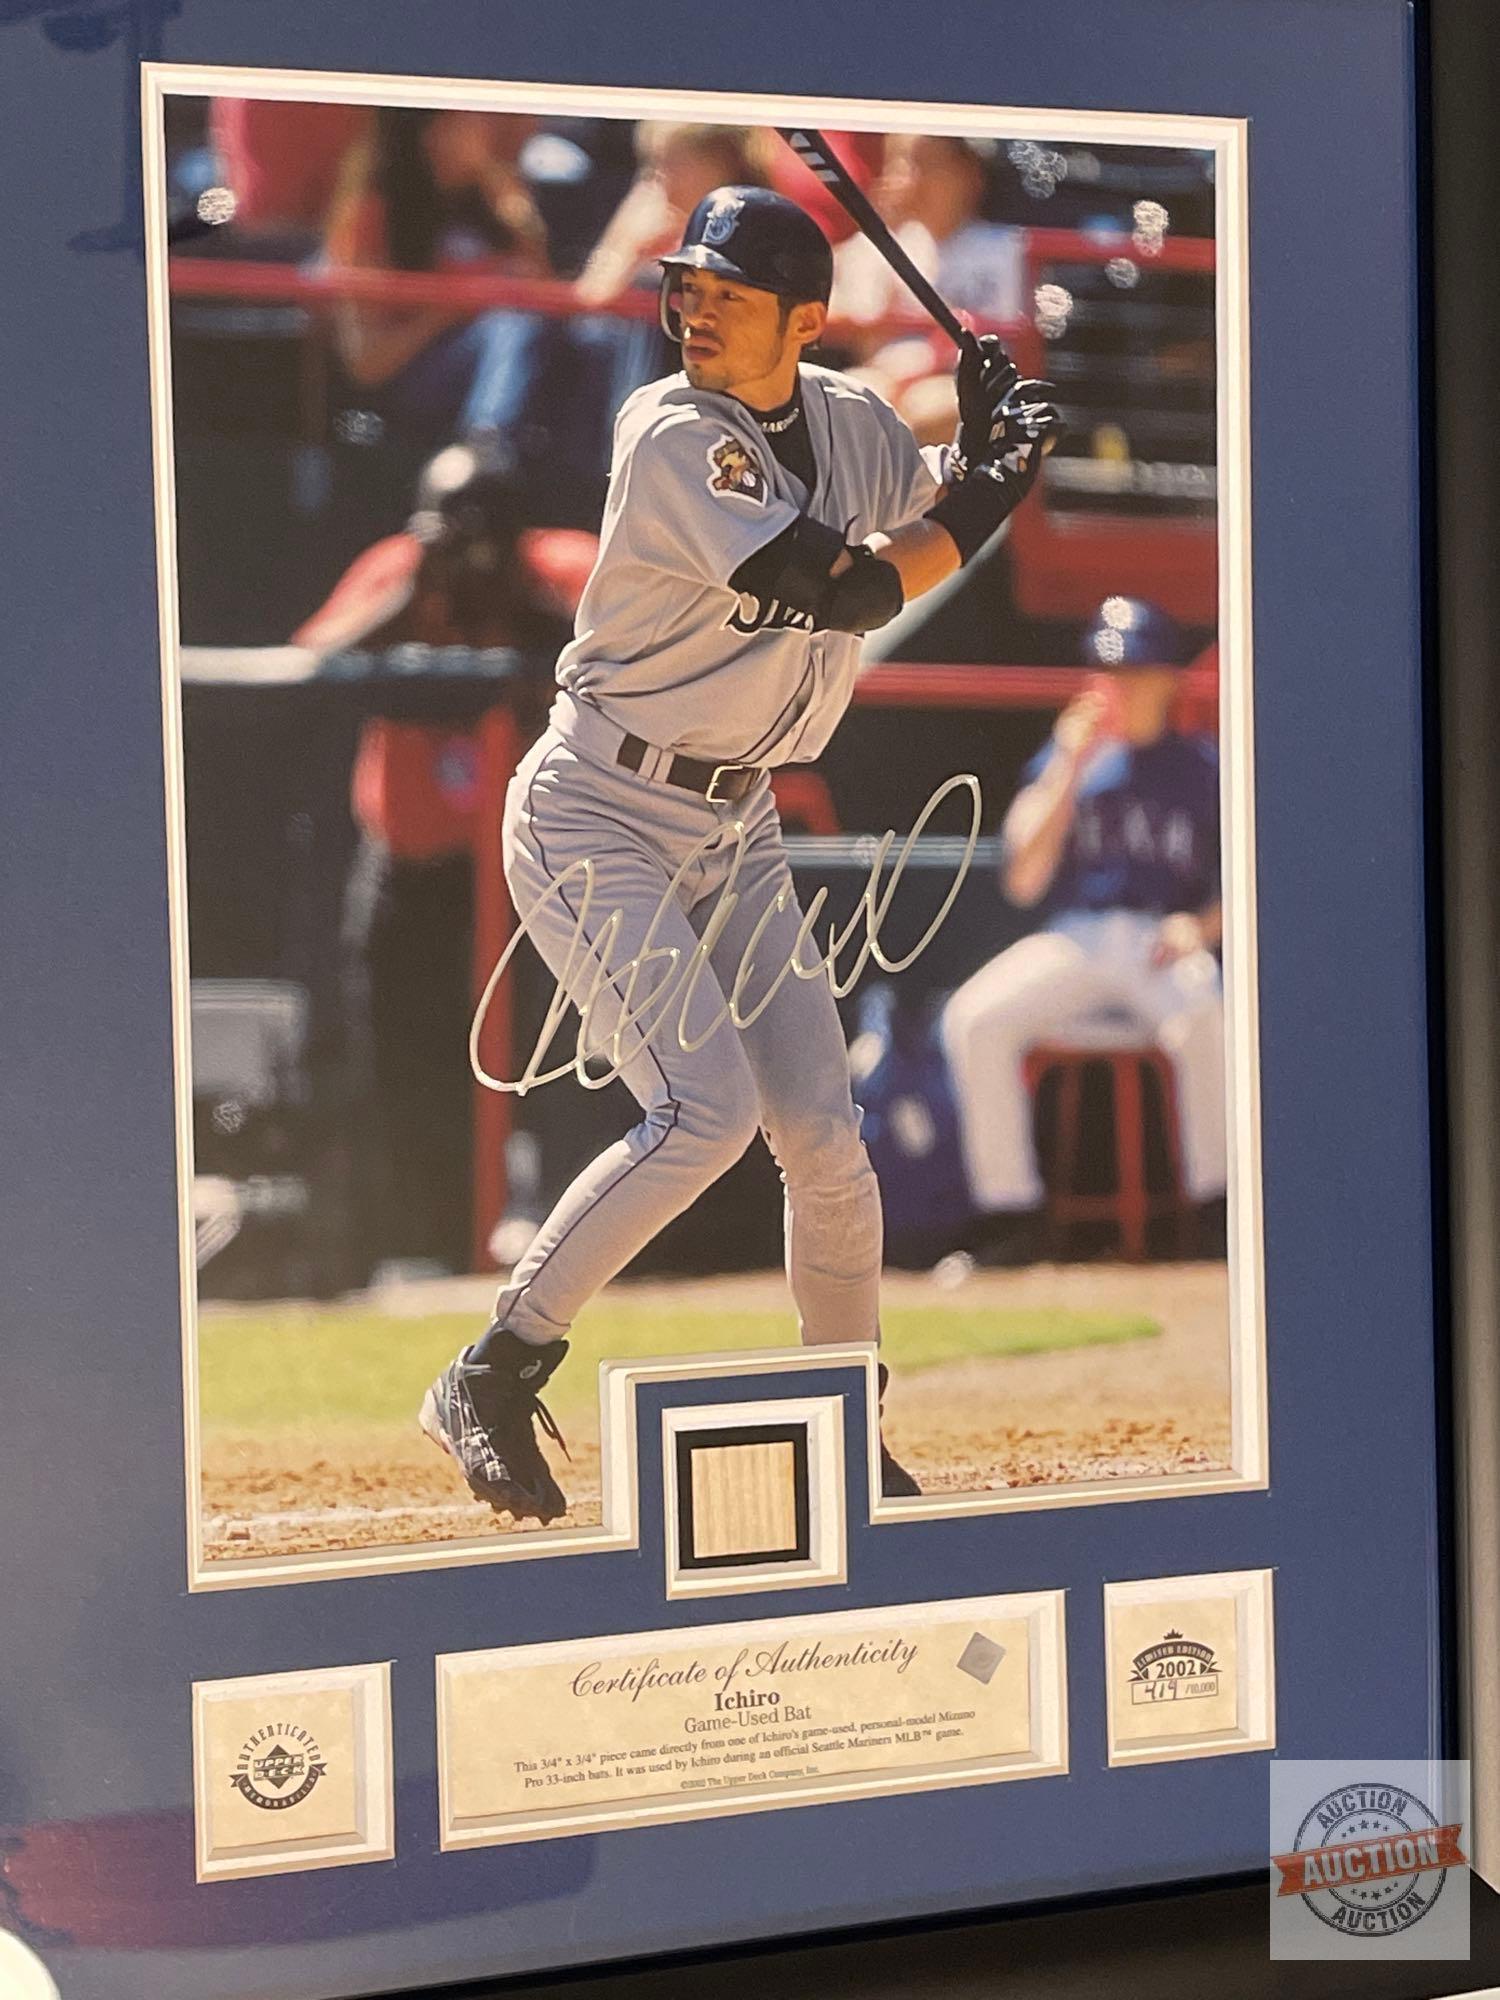 Sports - 2002 Limited Edition #419/10,000 Ichiro framed, matted, numbered and signed print